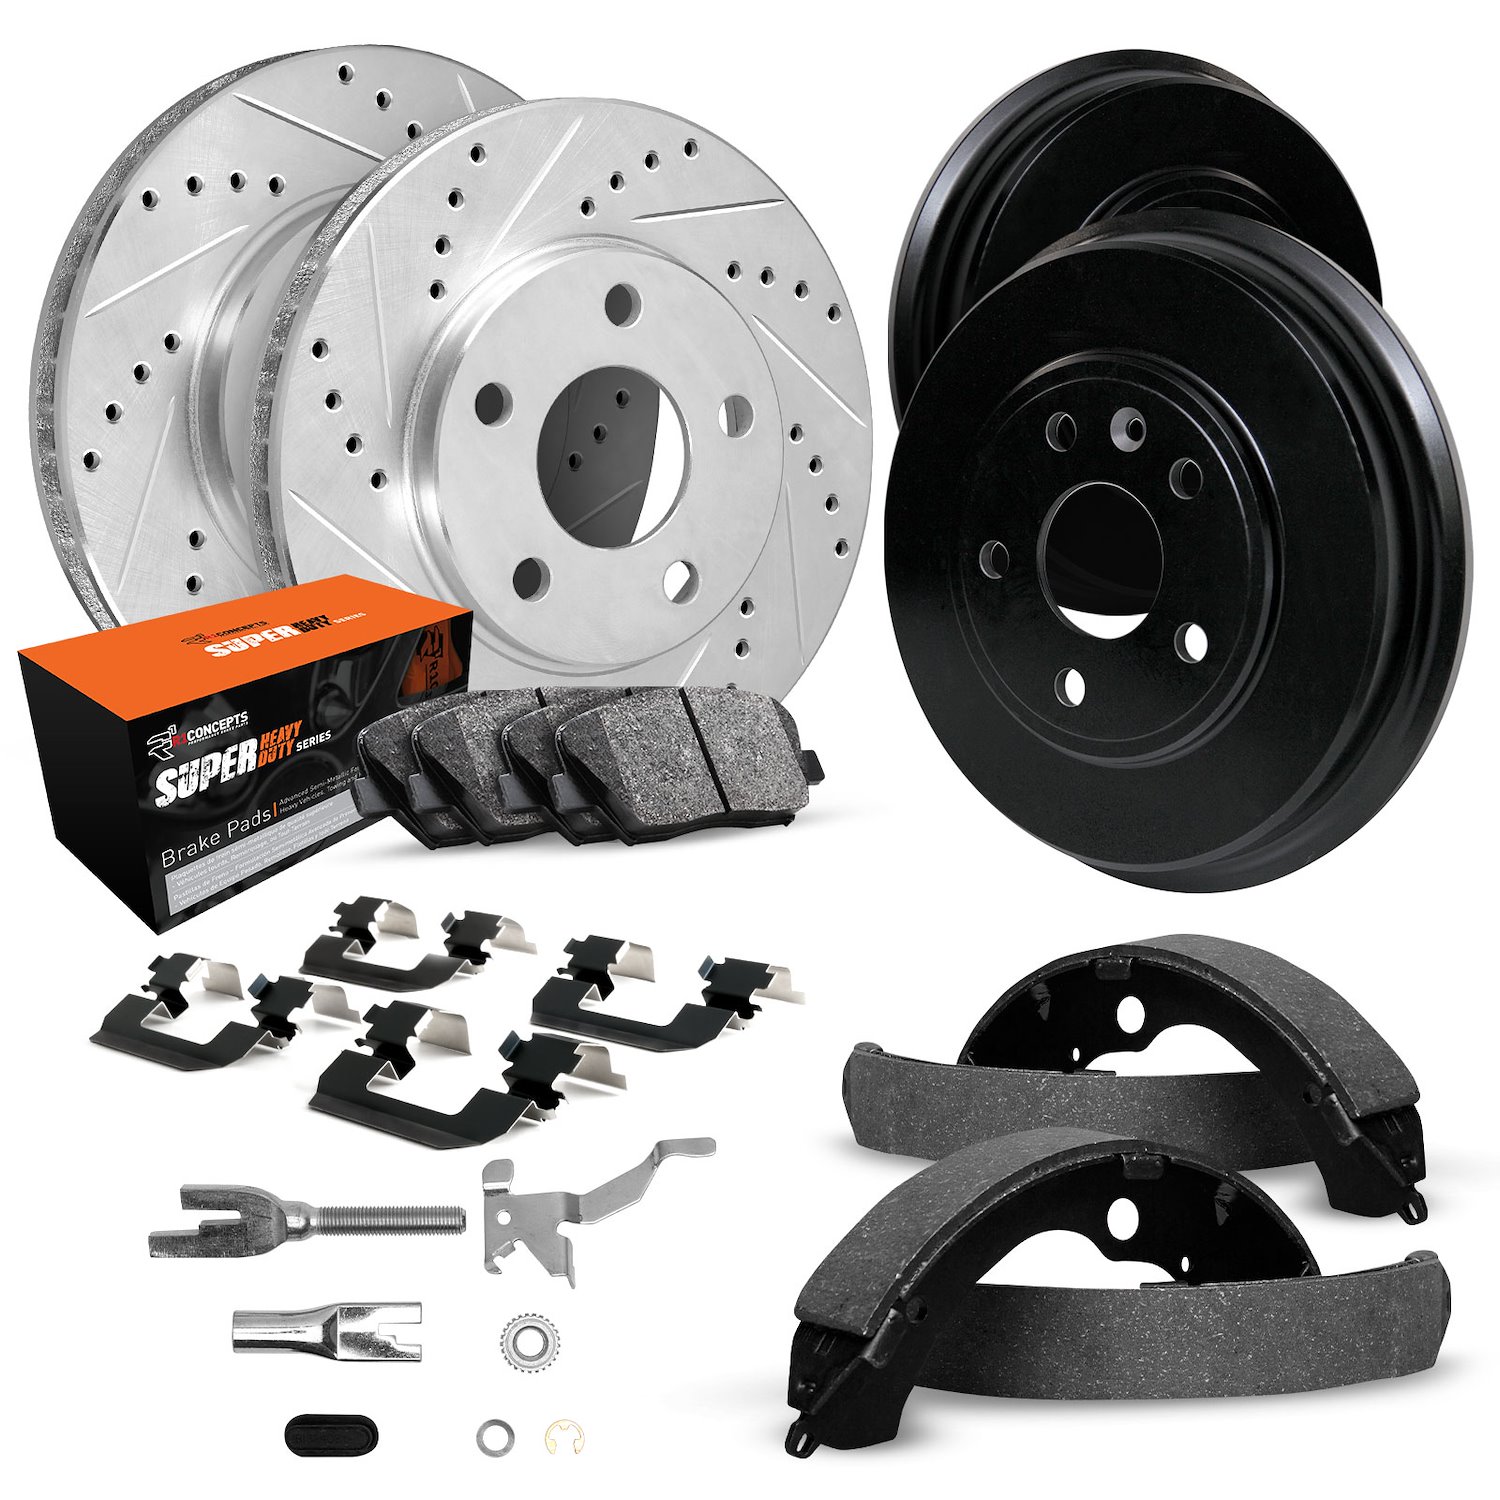 E-Line Drilled/Slotted Silver Rotor & Drum Set w/Super-Duty Pads, Shoes/Hardware/Adjusters, 1974-1988 Mopar